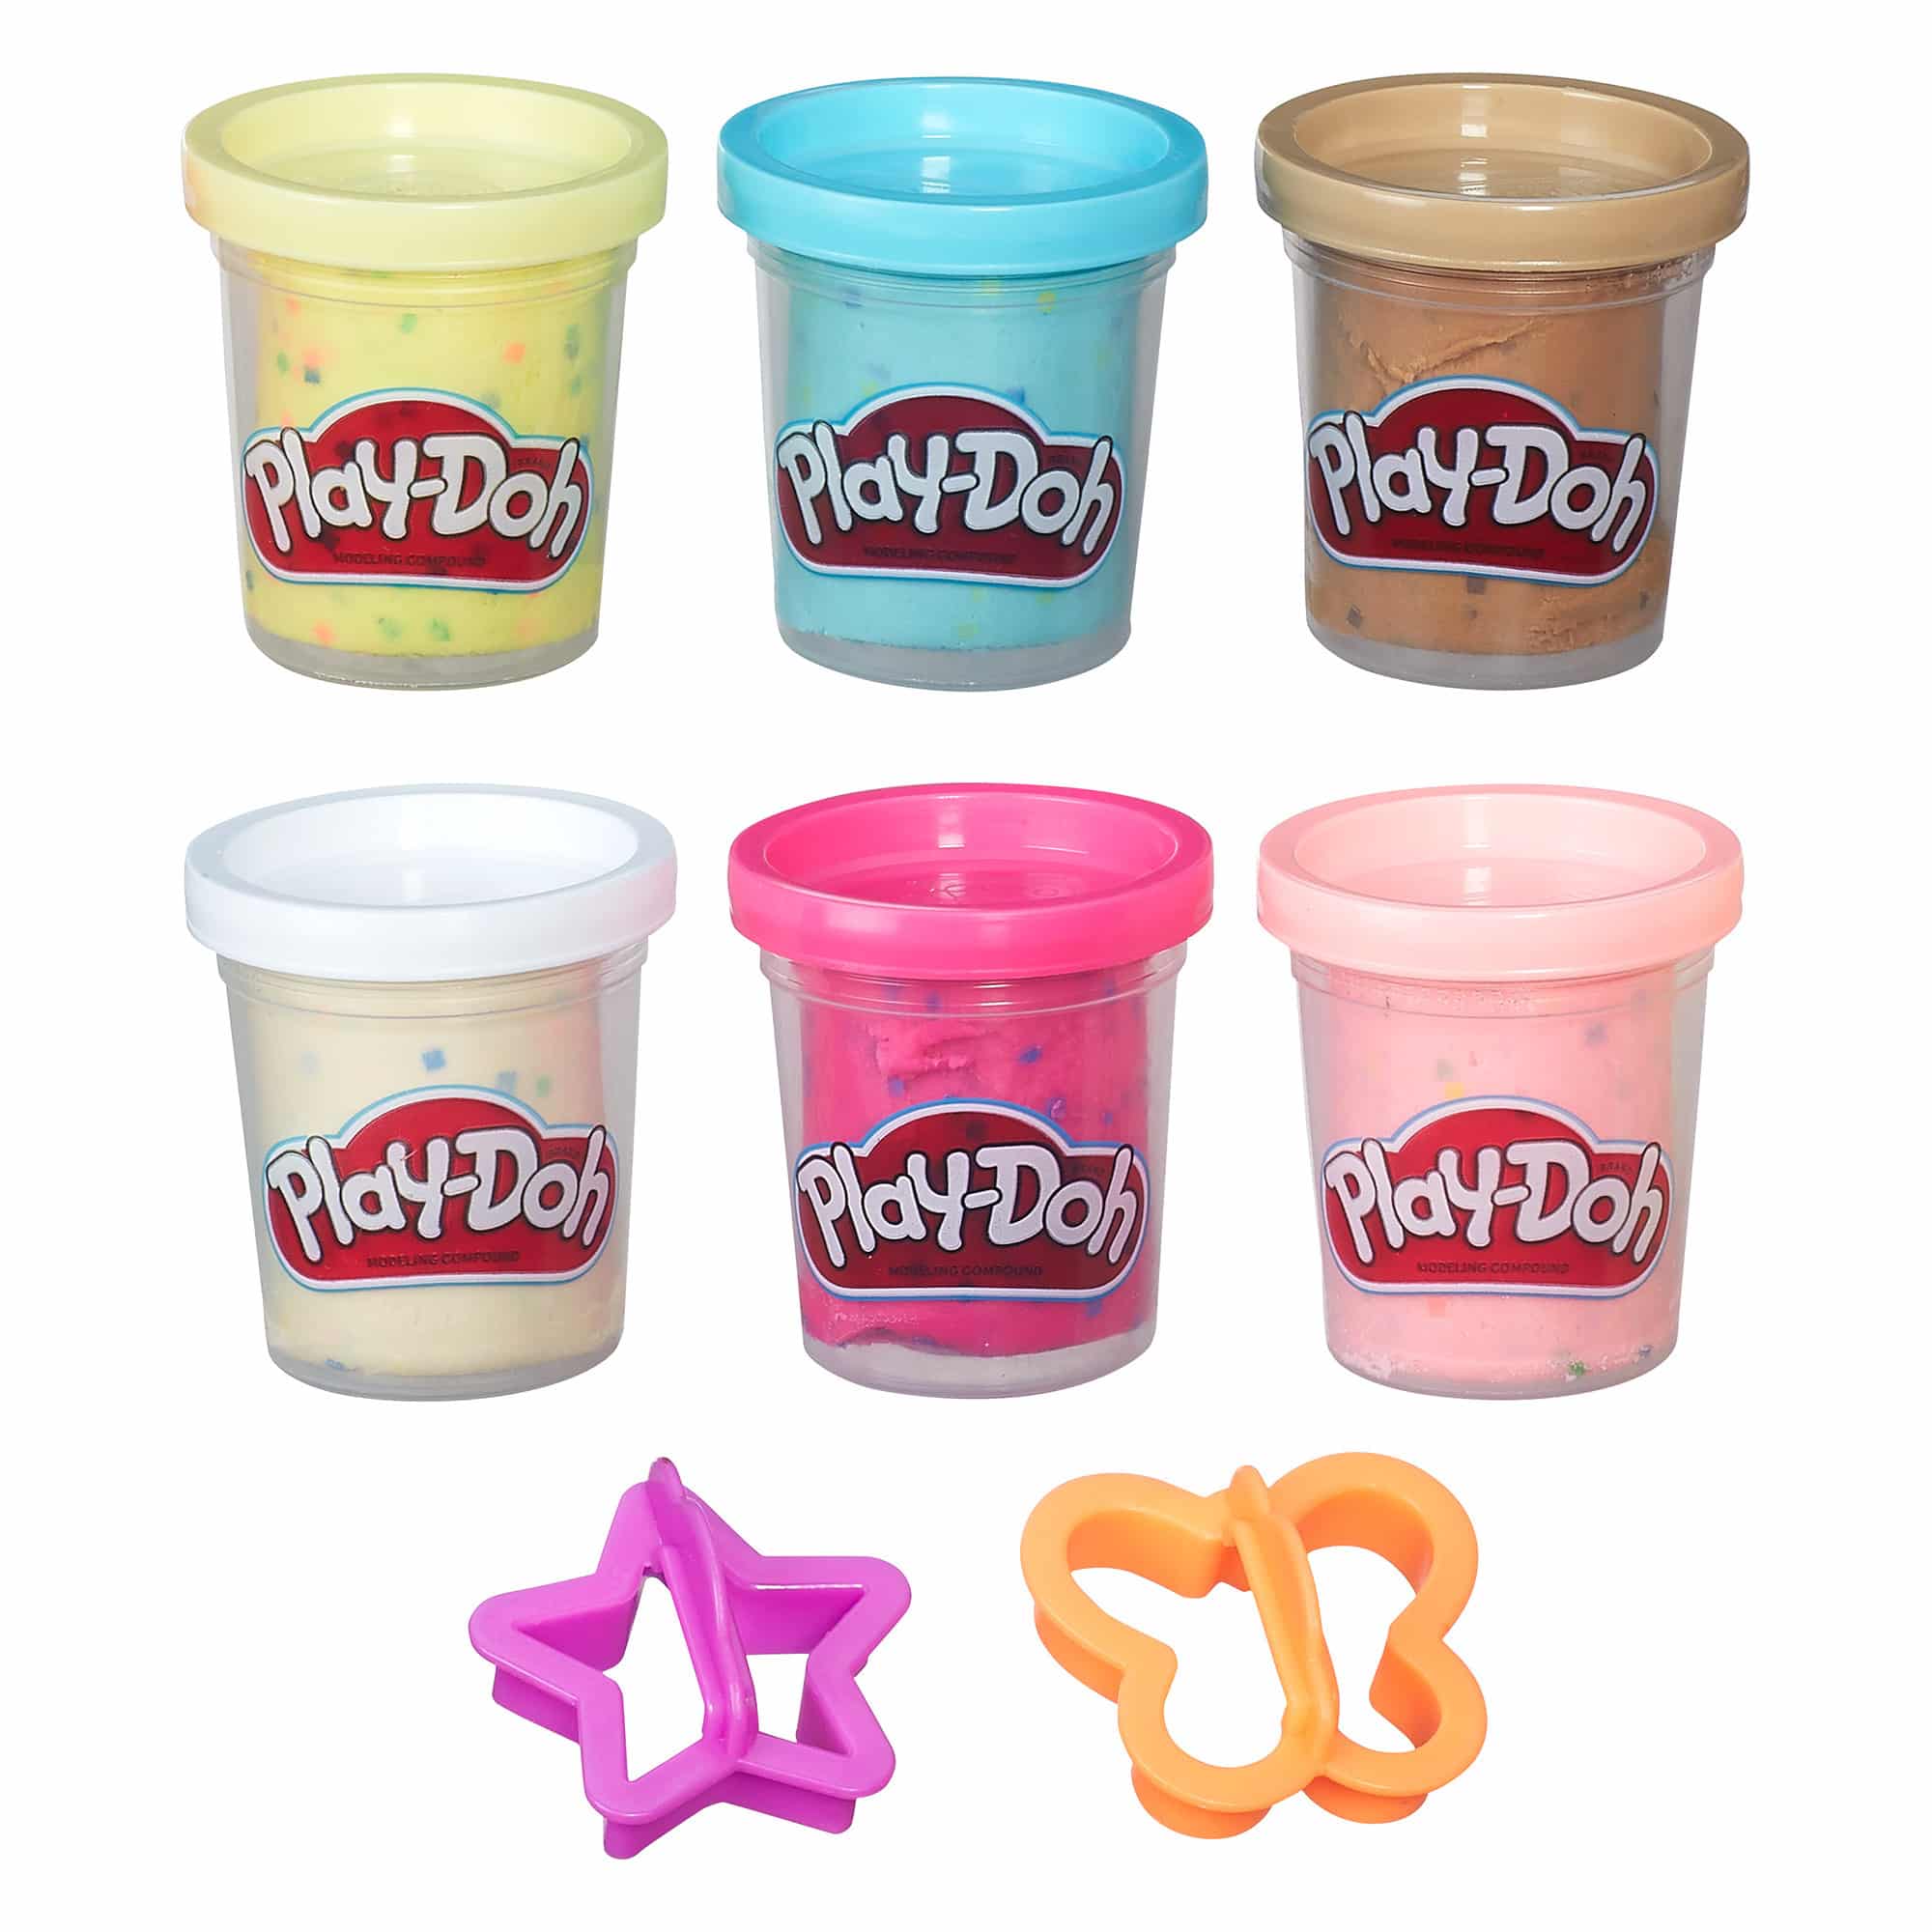 Play-Doh - Confetti Compound 6-Pack